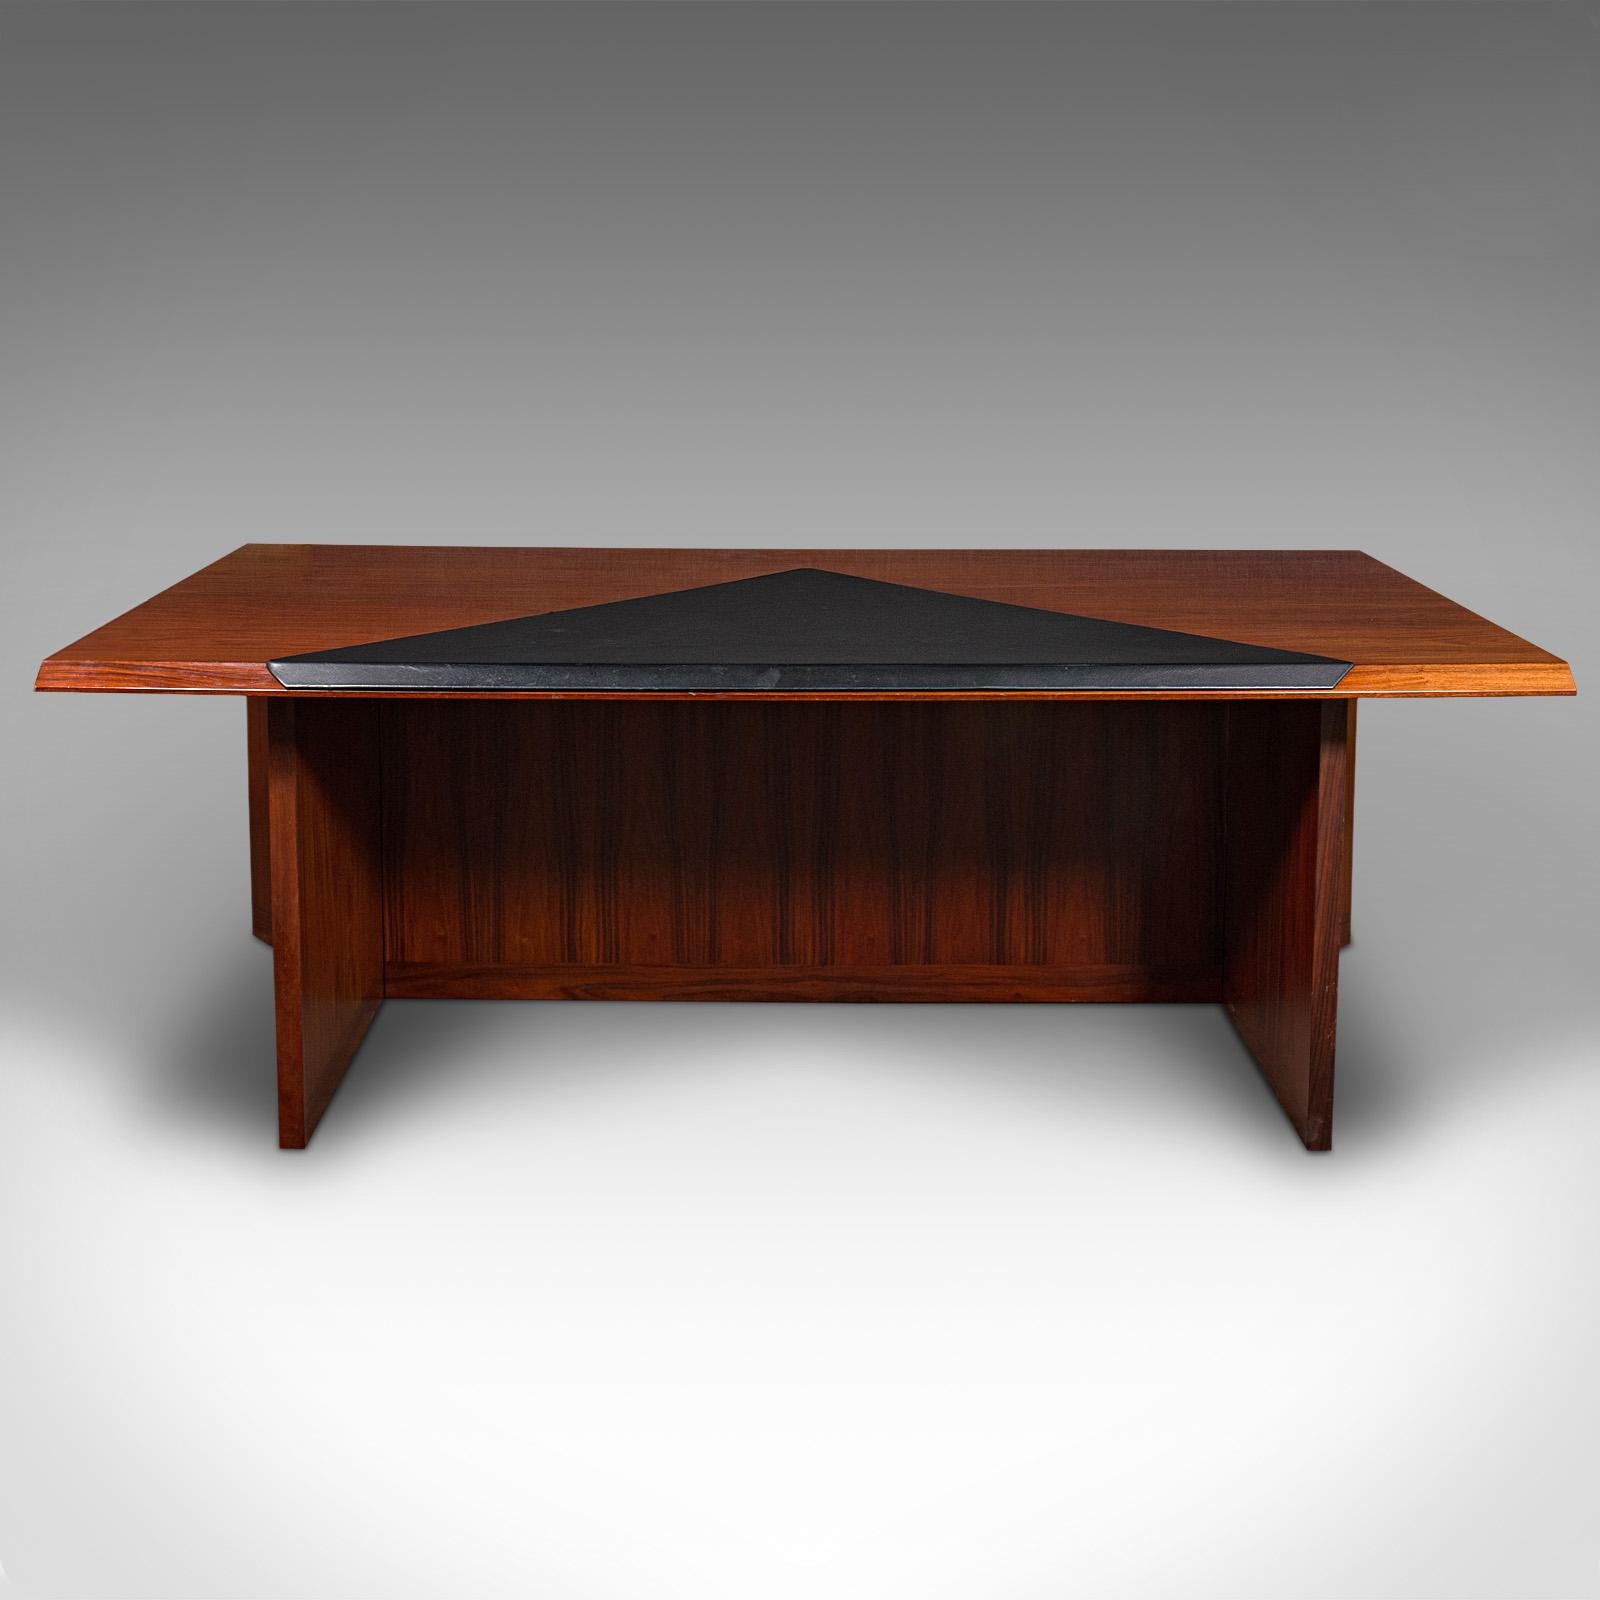 
This is a large vintage executive's desk. A Danish, rosewood designer office table by Sibast Mobel to a possibly bespoke design, dating to the late 20th century, circa 1970.

Sibast Mobel was founded by Helge Sibast (1908 - 1985) a Danish craftsman